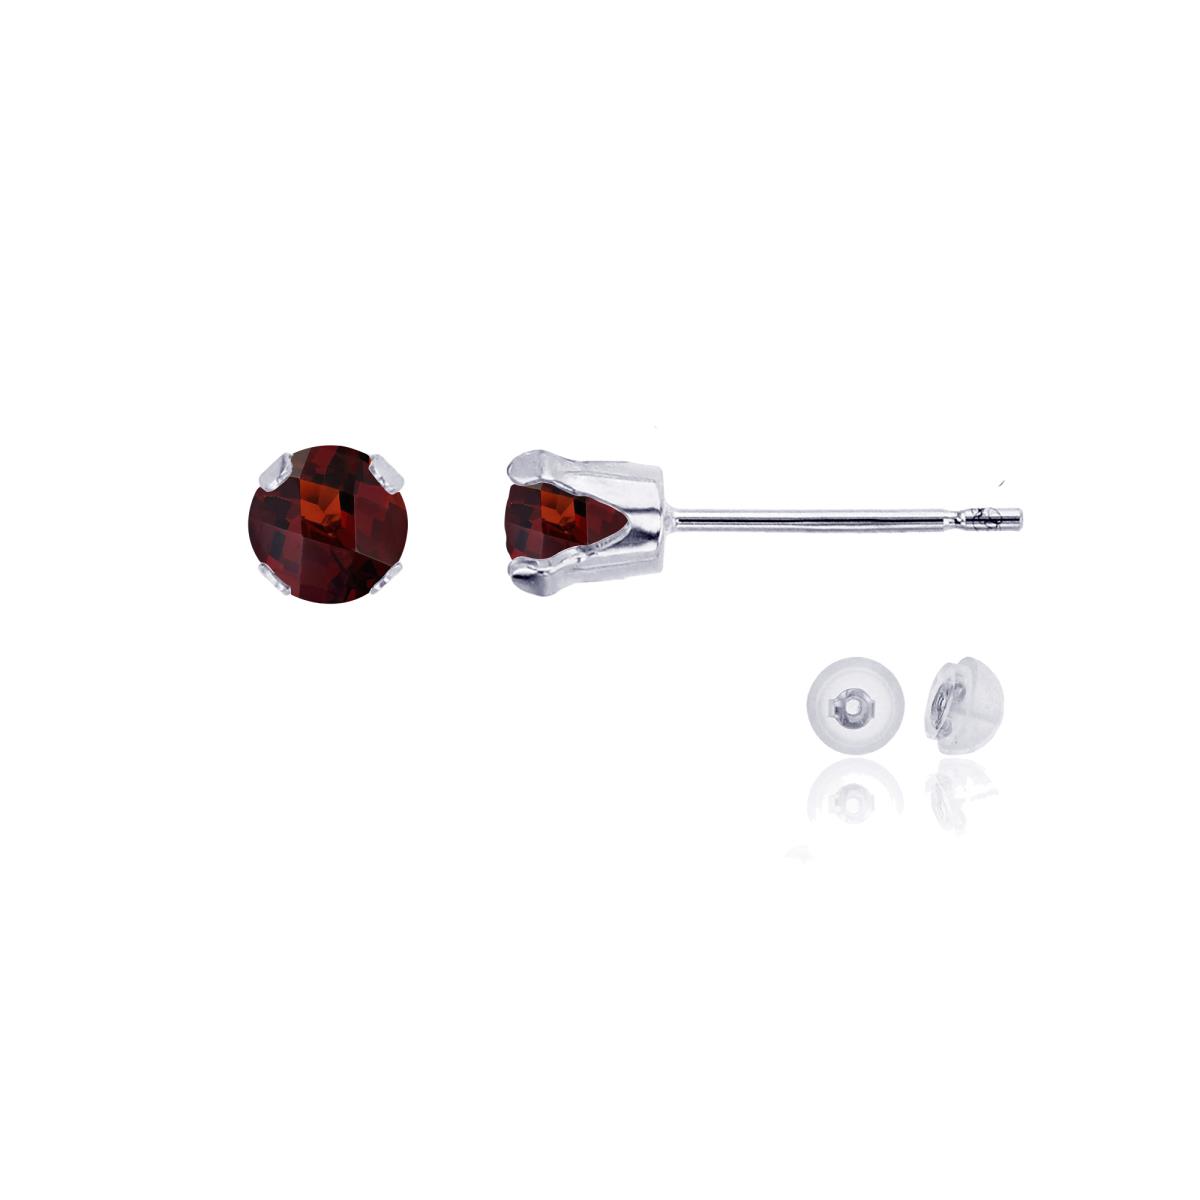 10K White Gold 4mm Round Garnet Stud Earring with Silicone Back